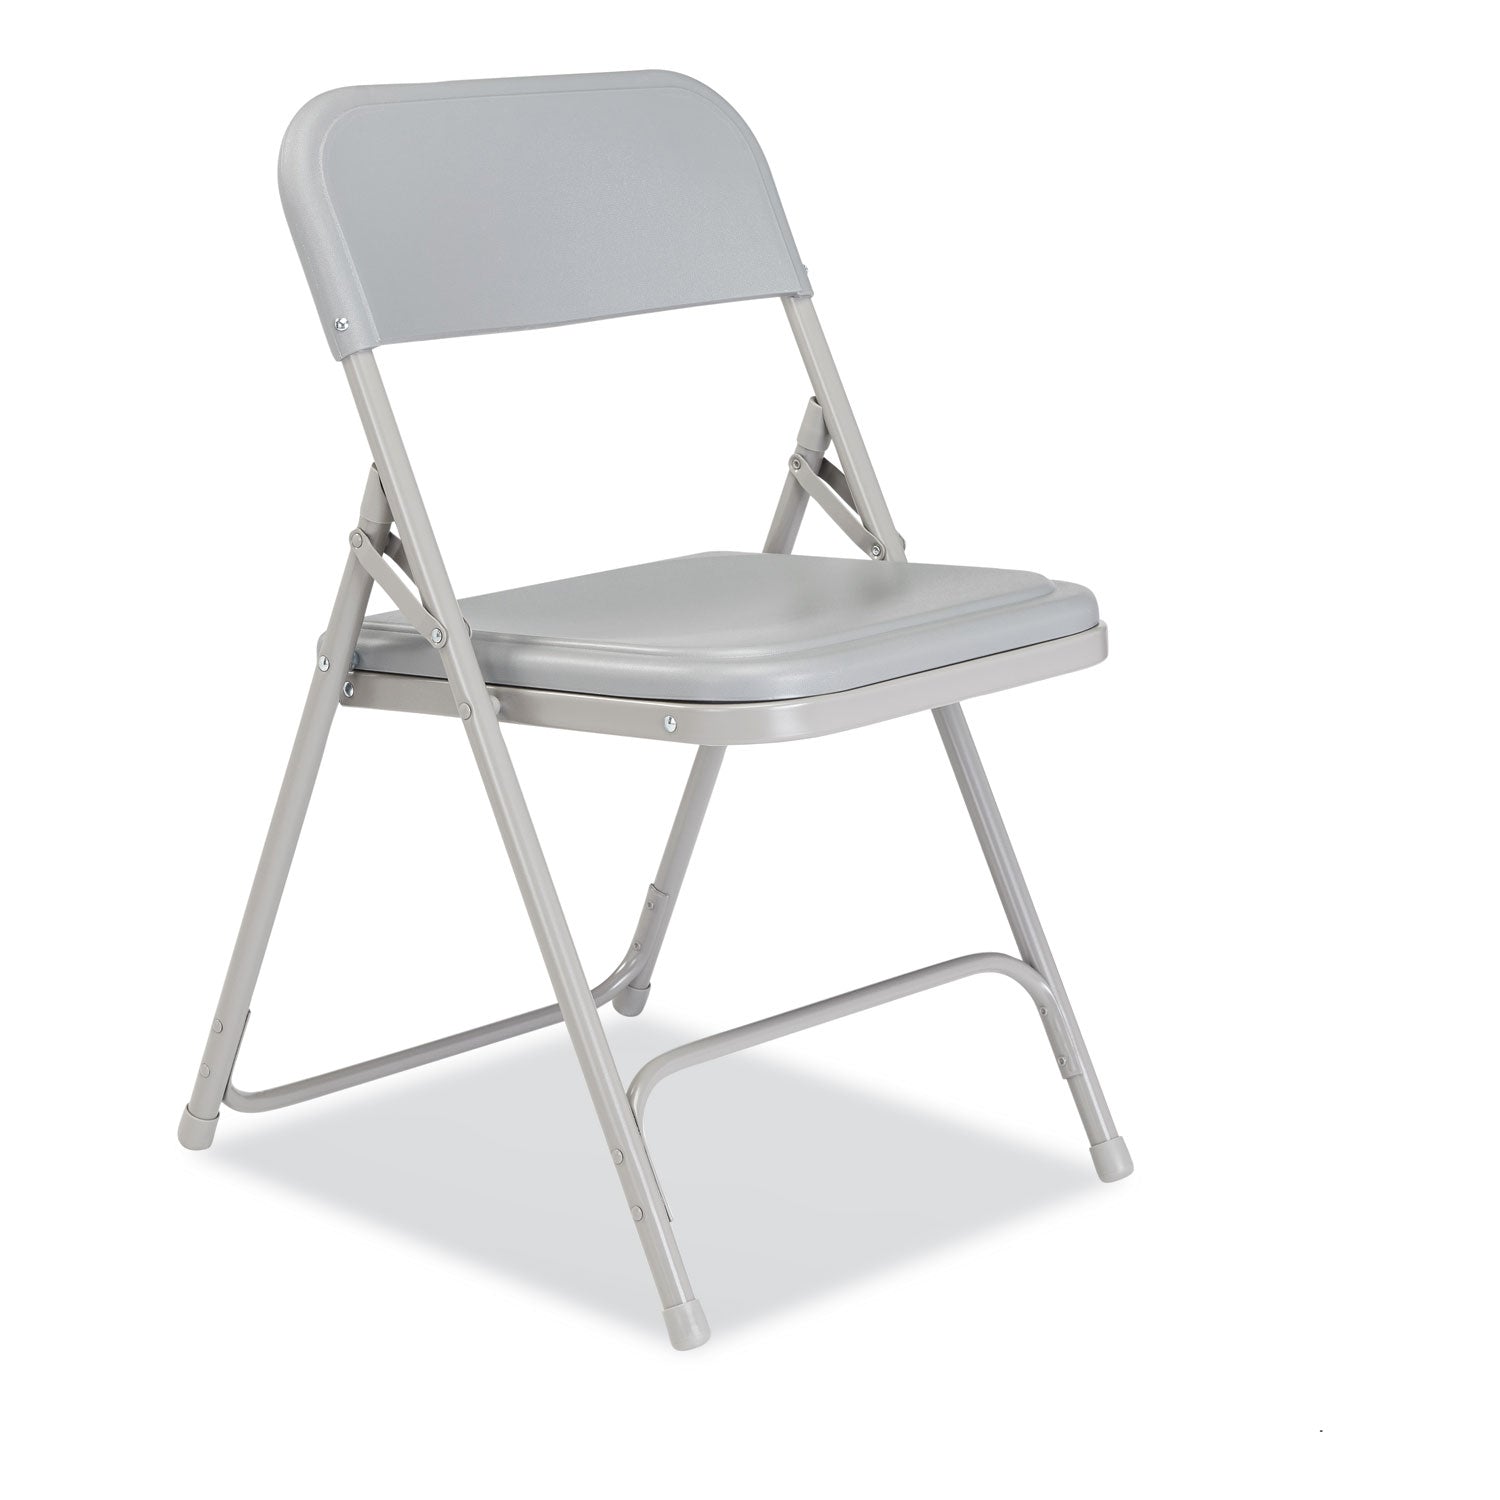 800-series-premium-plastic-folding-chair-supports-500-lb-18-seat-ht-gray-seat-back-gray-base-4-ctships-in-1-3-bus-days_nps802 - 2